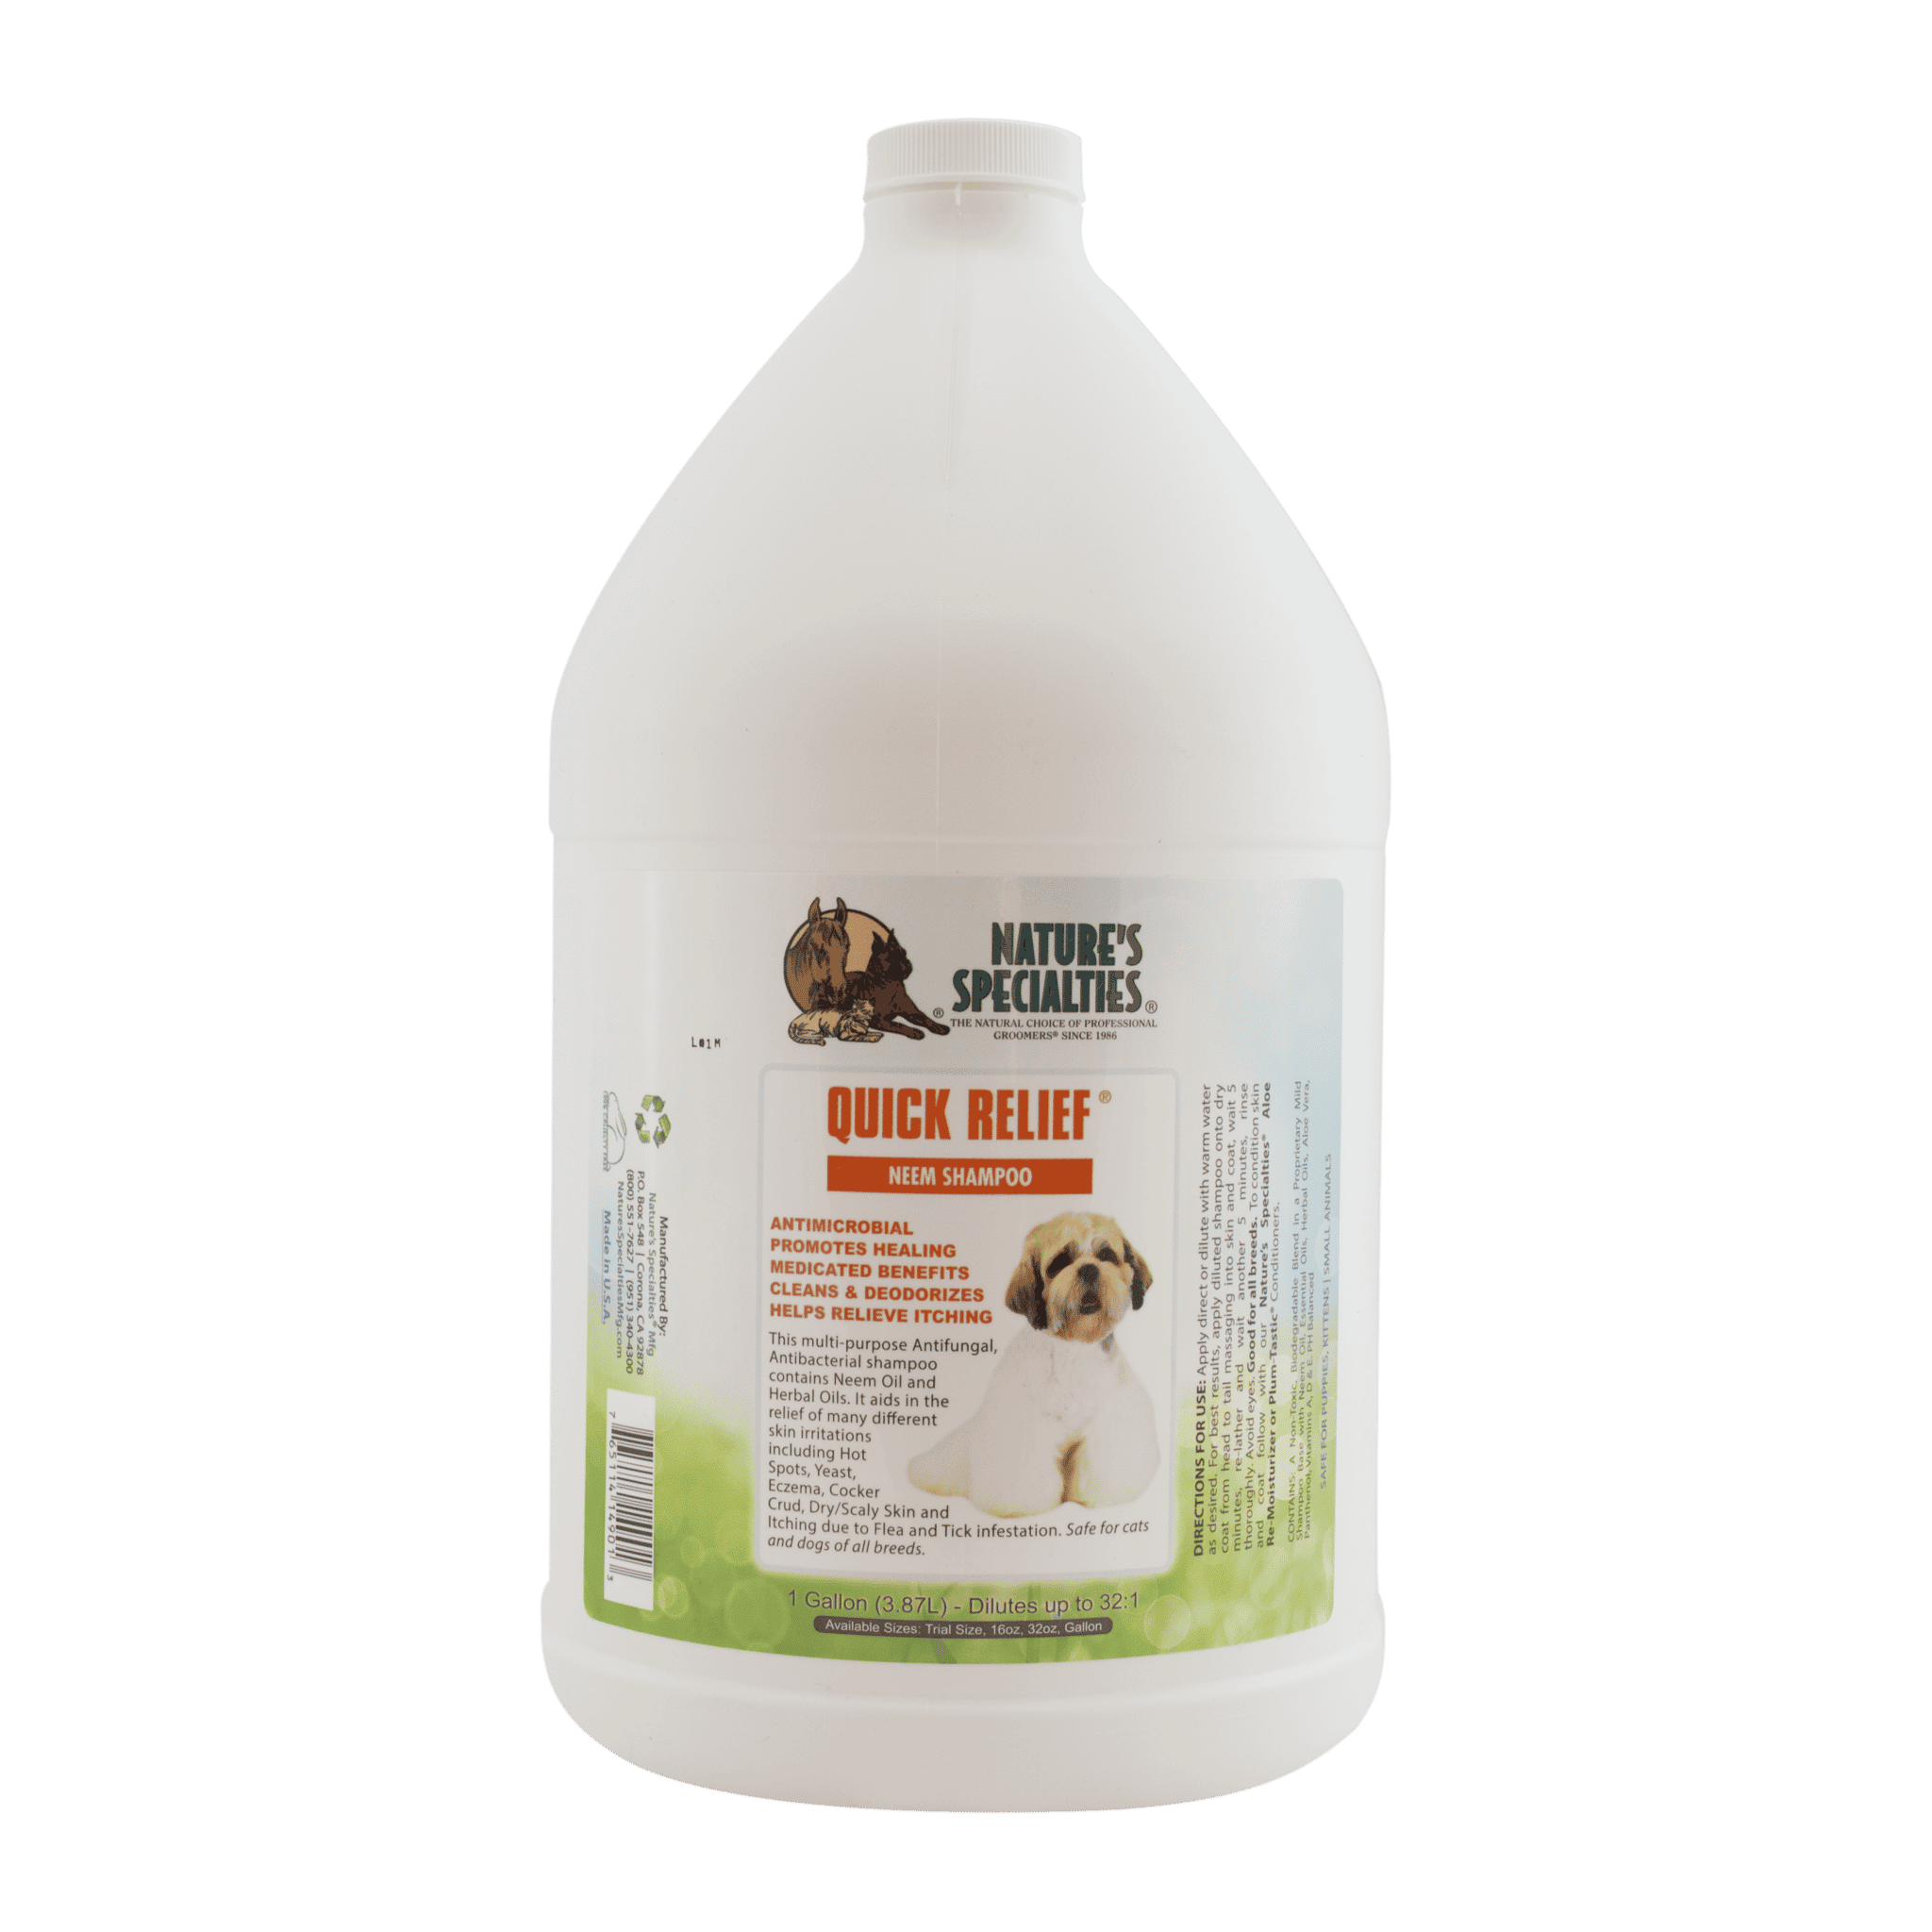 Quick Relief Neem Shampoo Gallon by Nature's Specialties